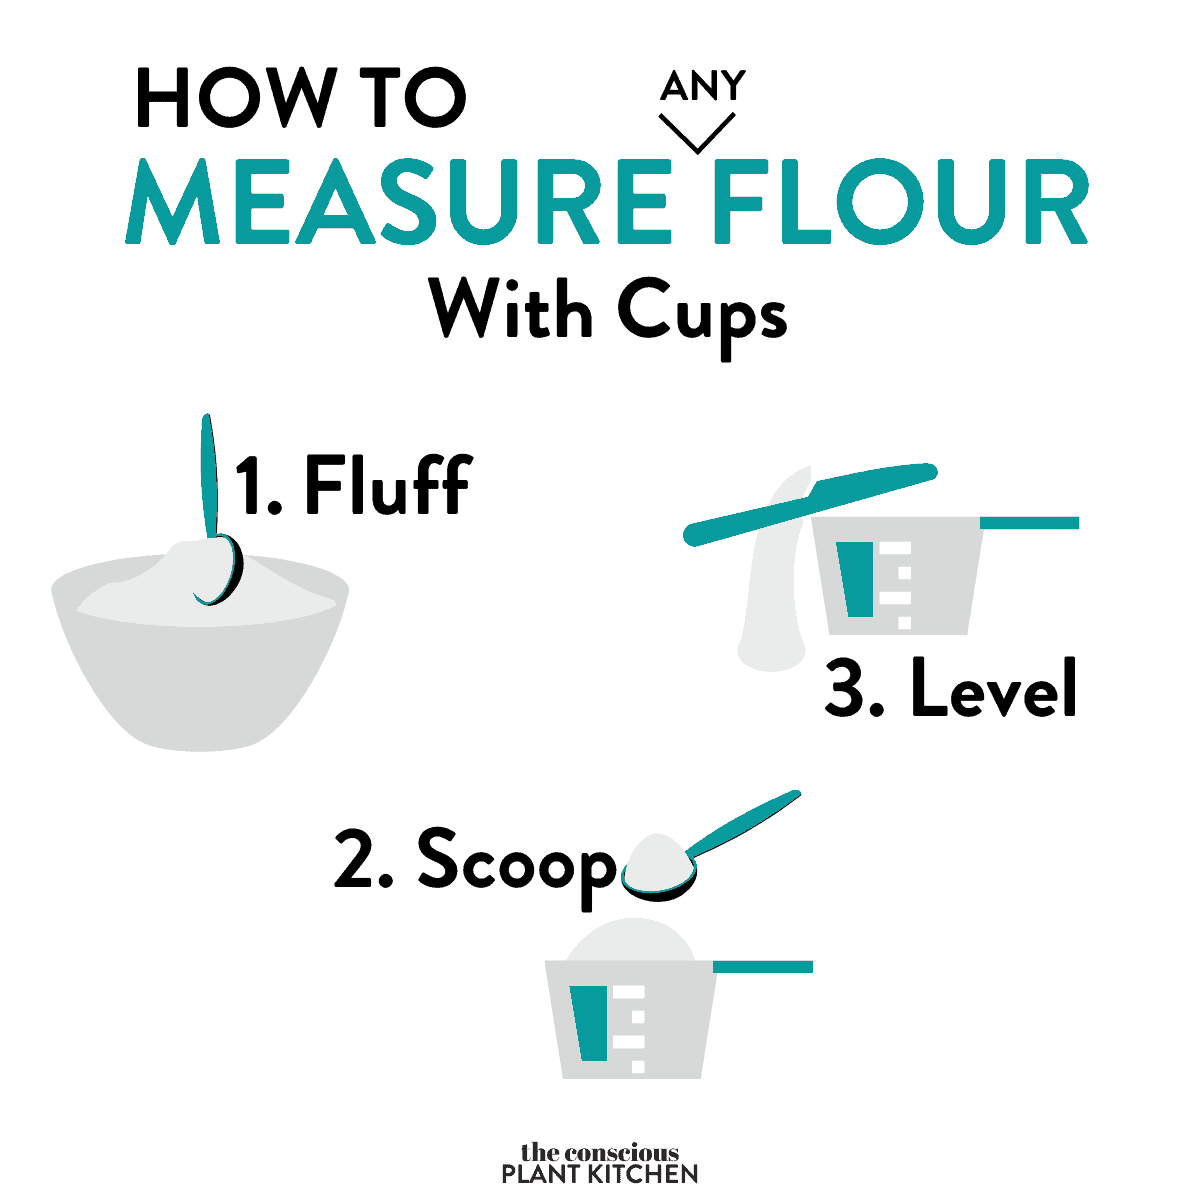 How To Measure Flour With Cups